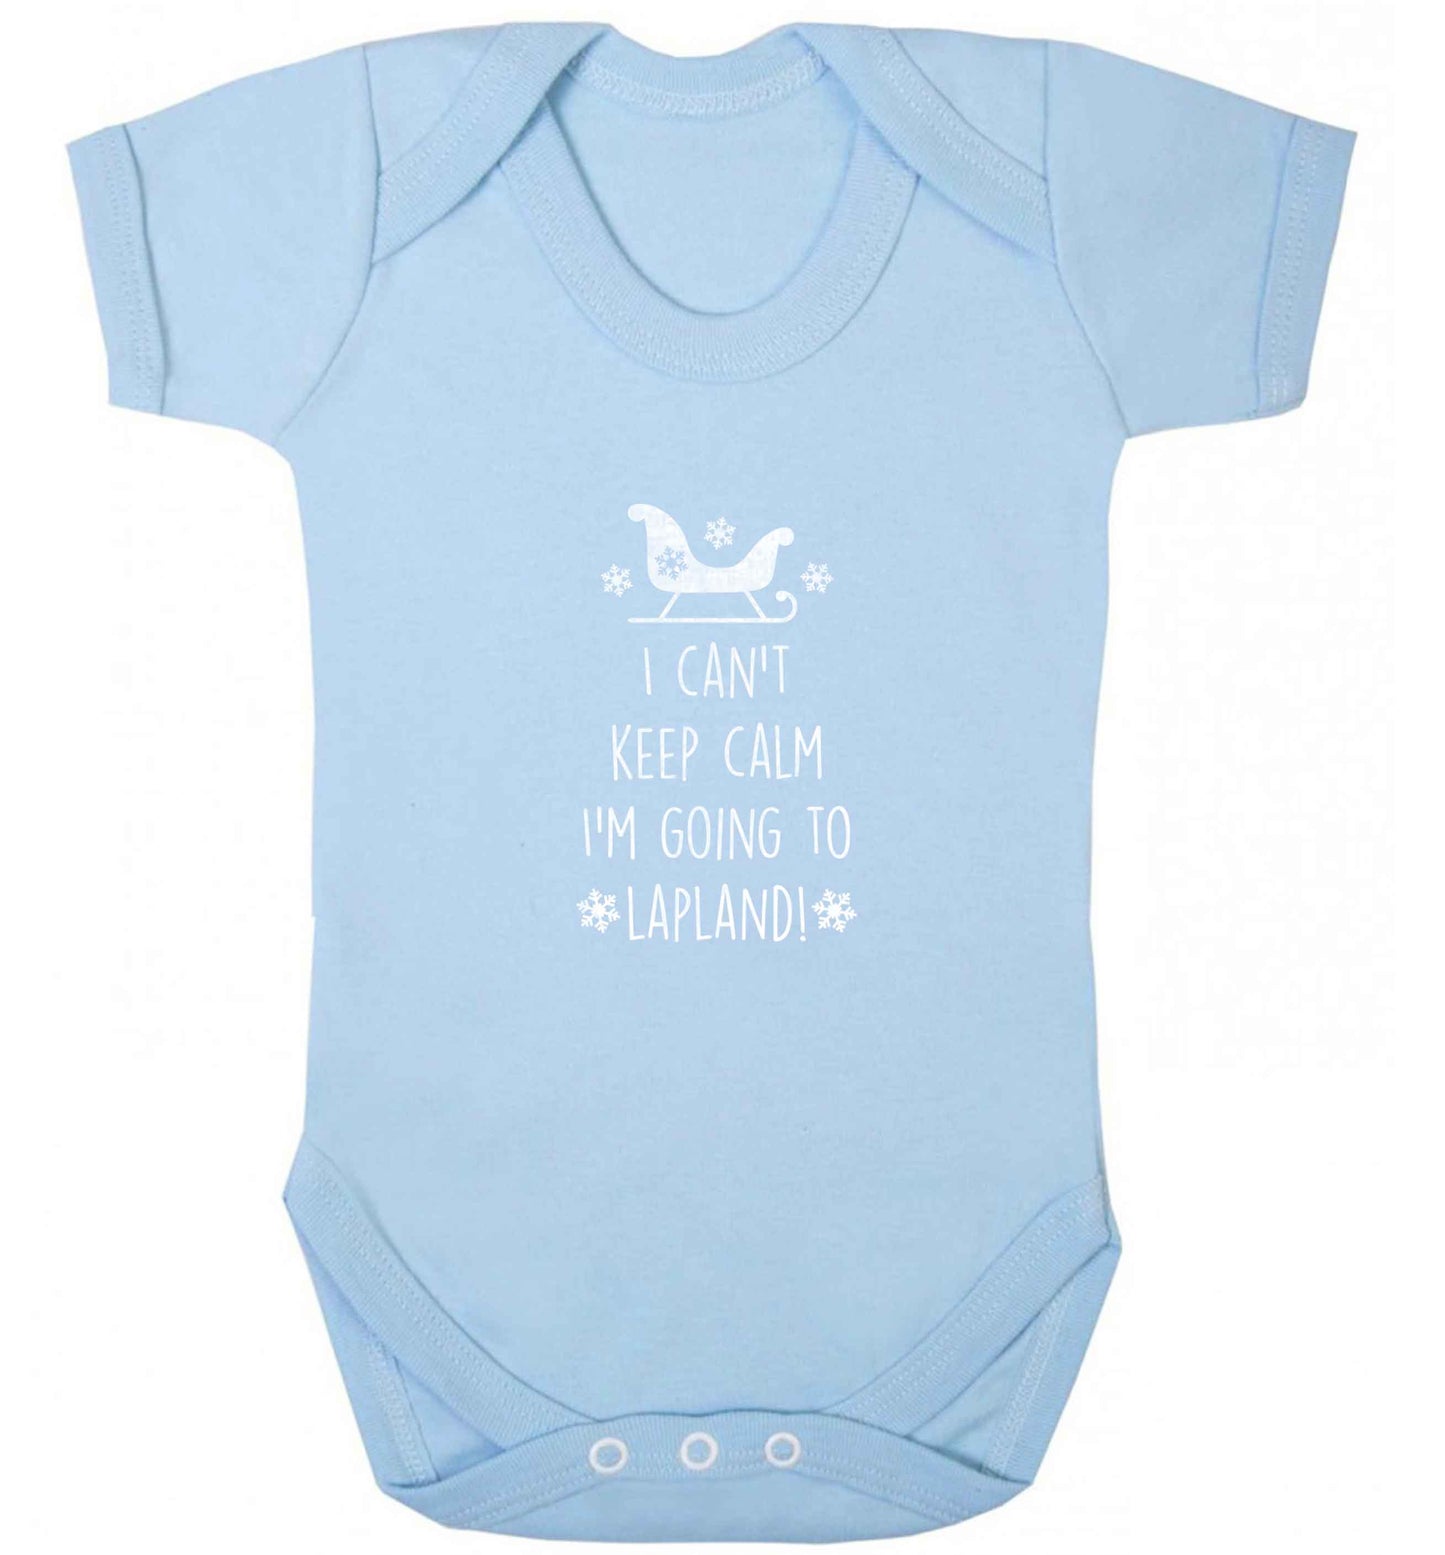 I can't keep calm I'm going to Lapland baby vest pale blue 18-24 months